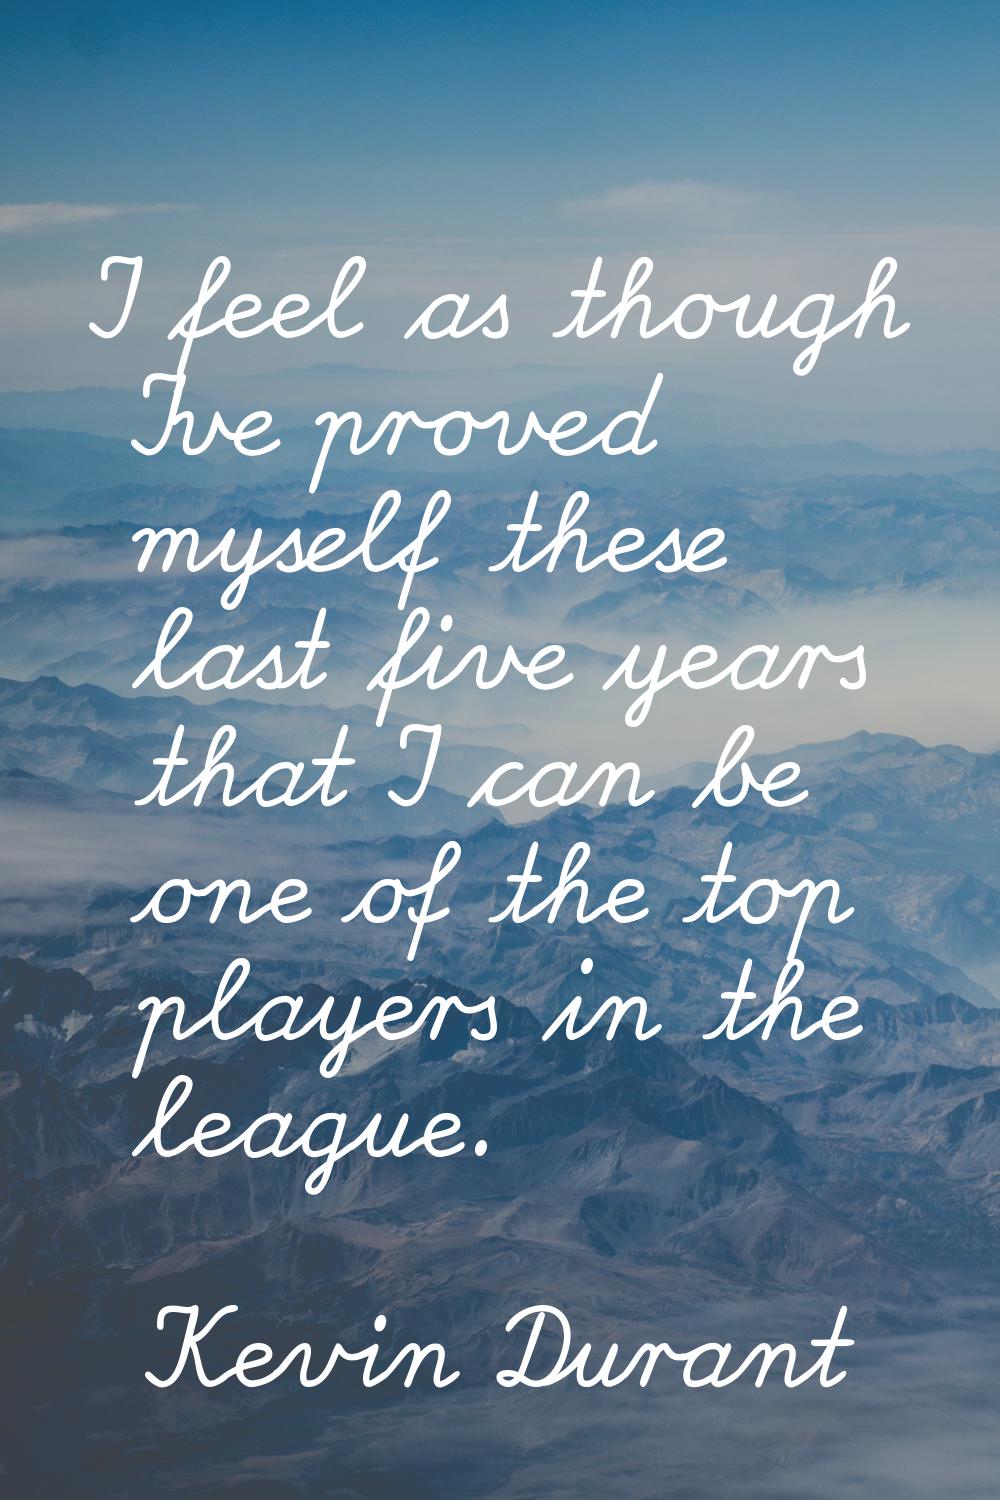 I feel as though I've proved myself these last five years that I can be one of the top players in t